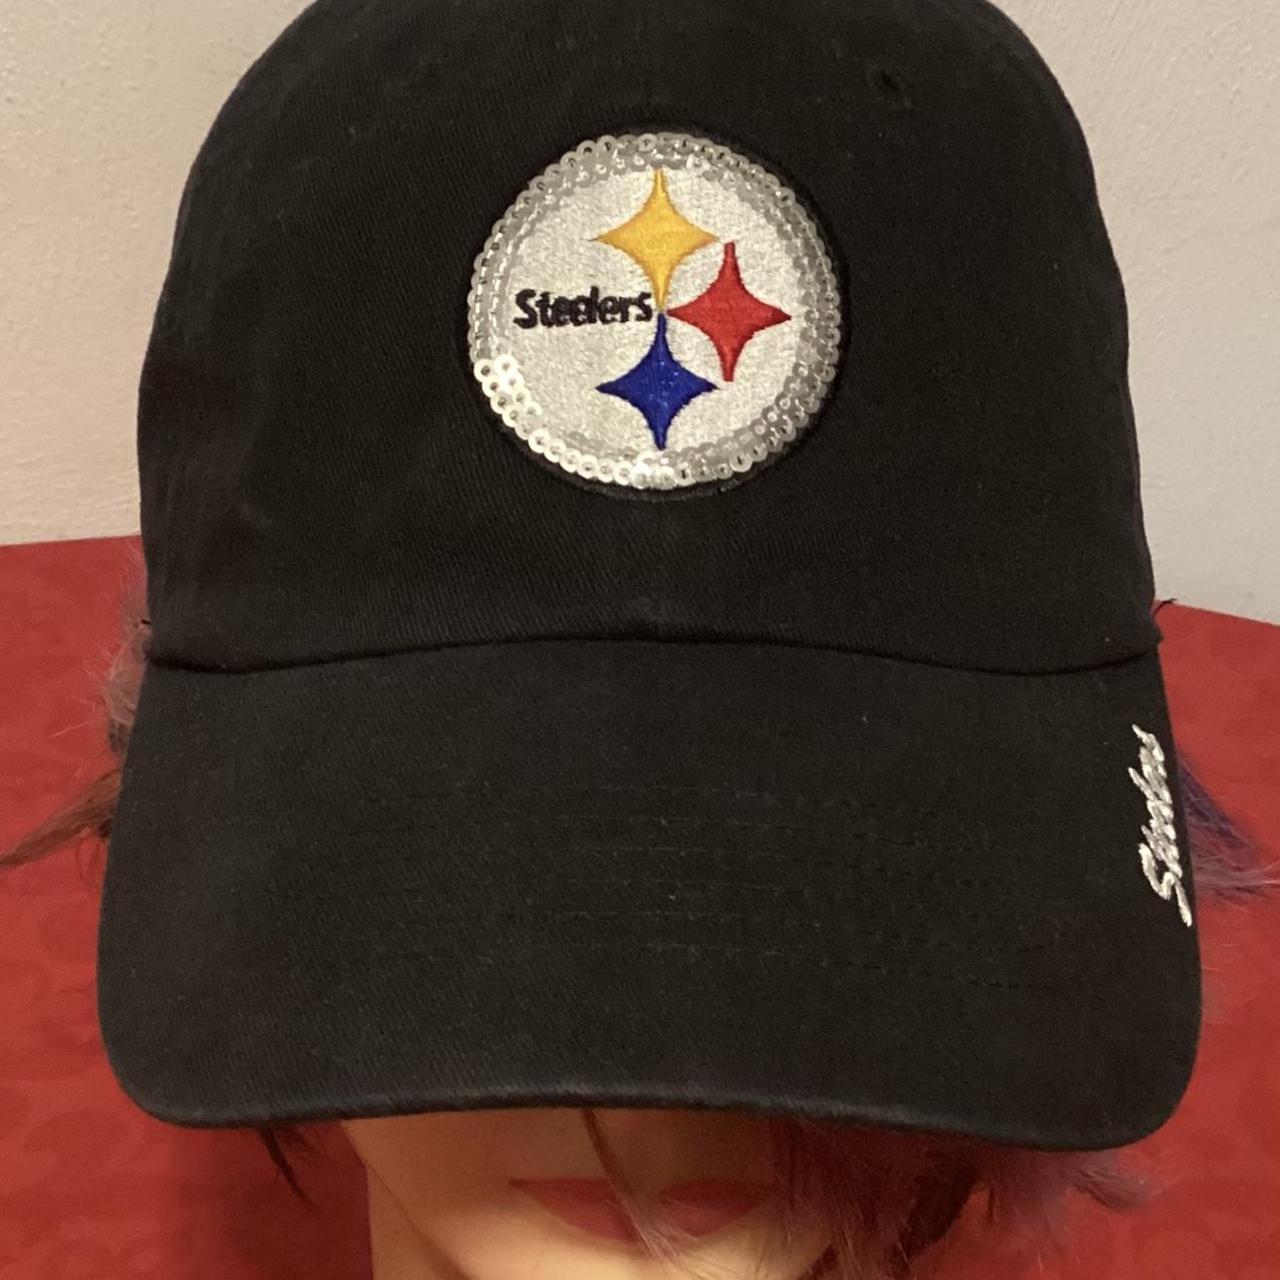 New without tag (old stock) Pittsburgh Steelers ~ - Depop